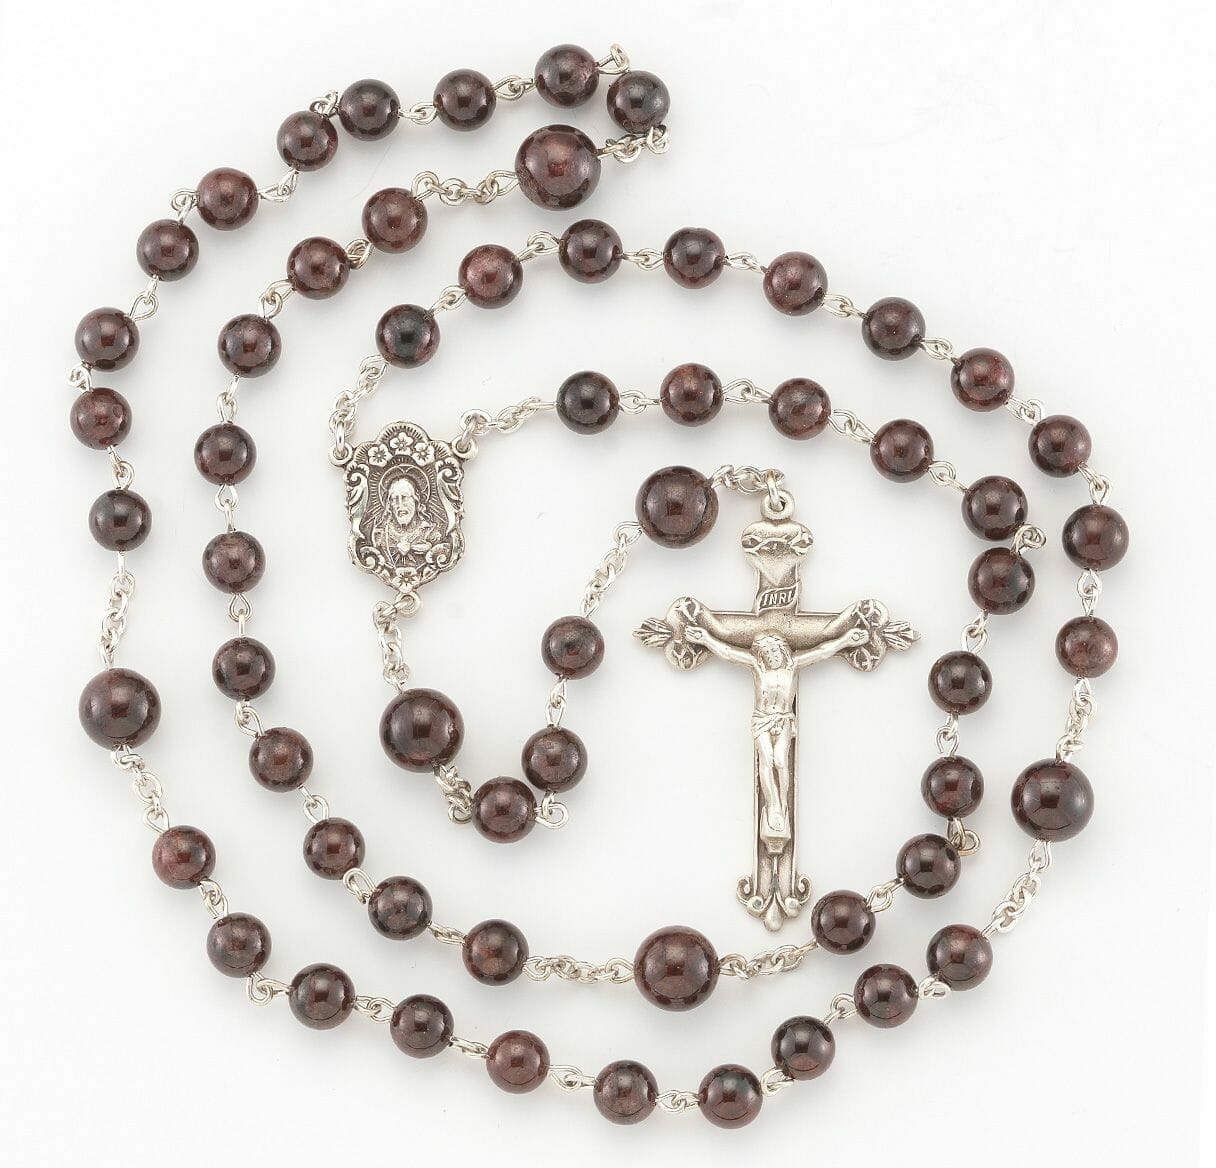 Round Garnet Bead Rosary Sterling Crucifix and Centerpiece - Buy ...